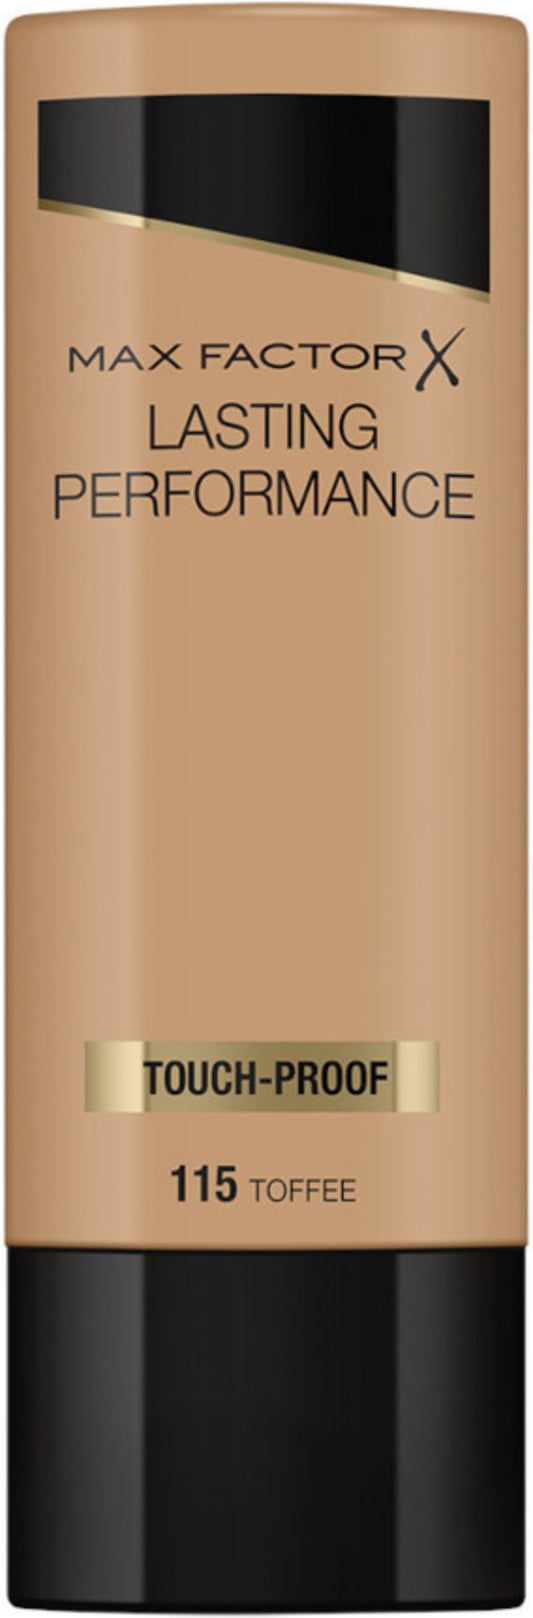 Max Factor Lasting Performance Foundation 115 Toffee